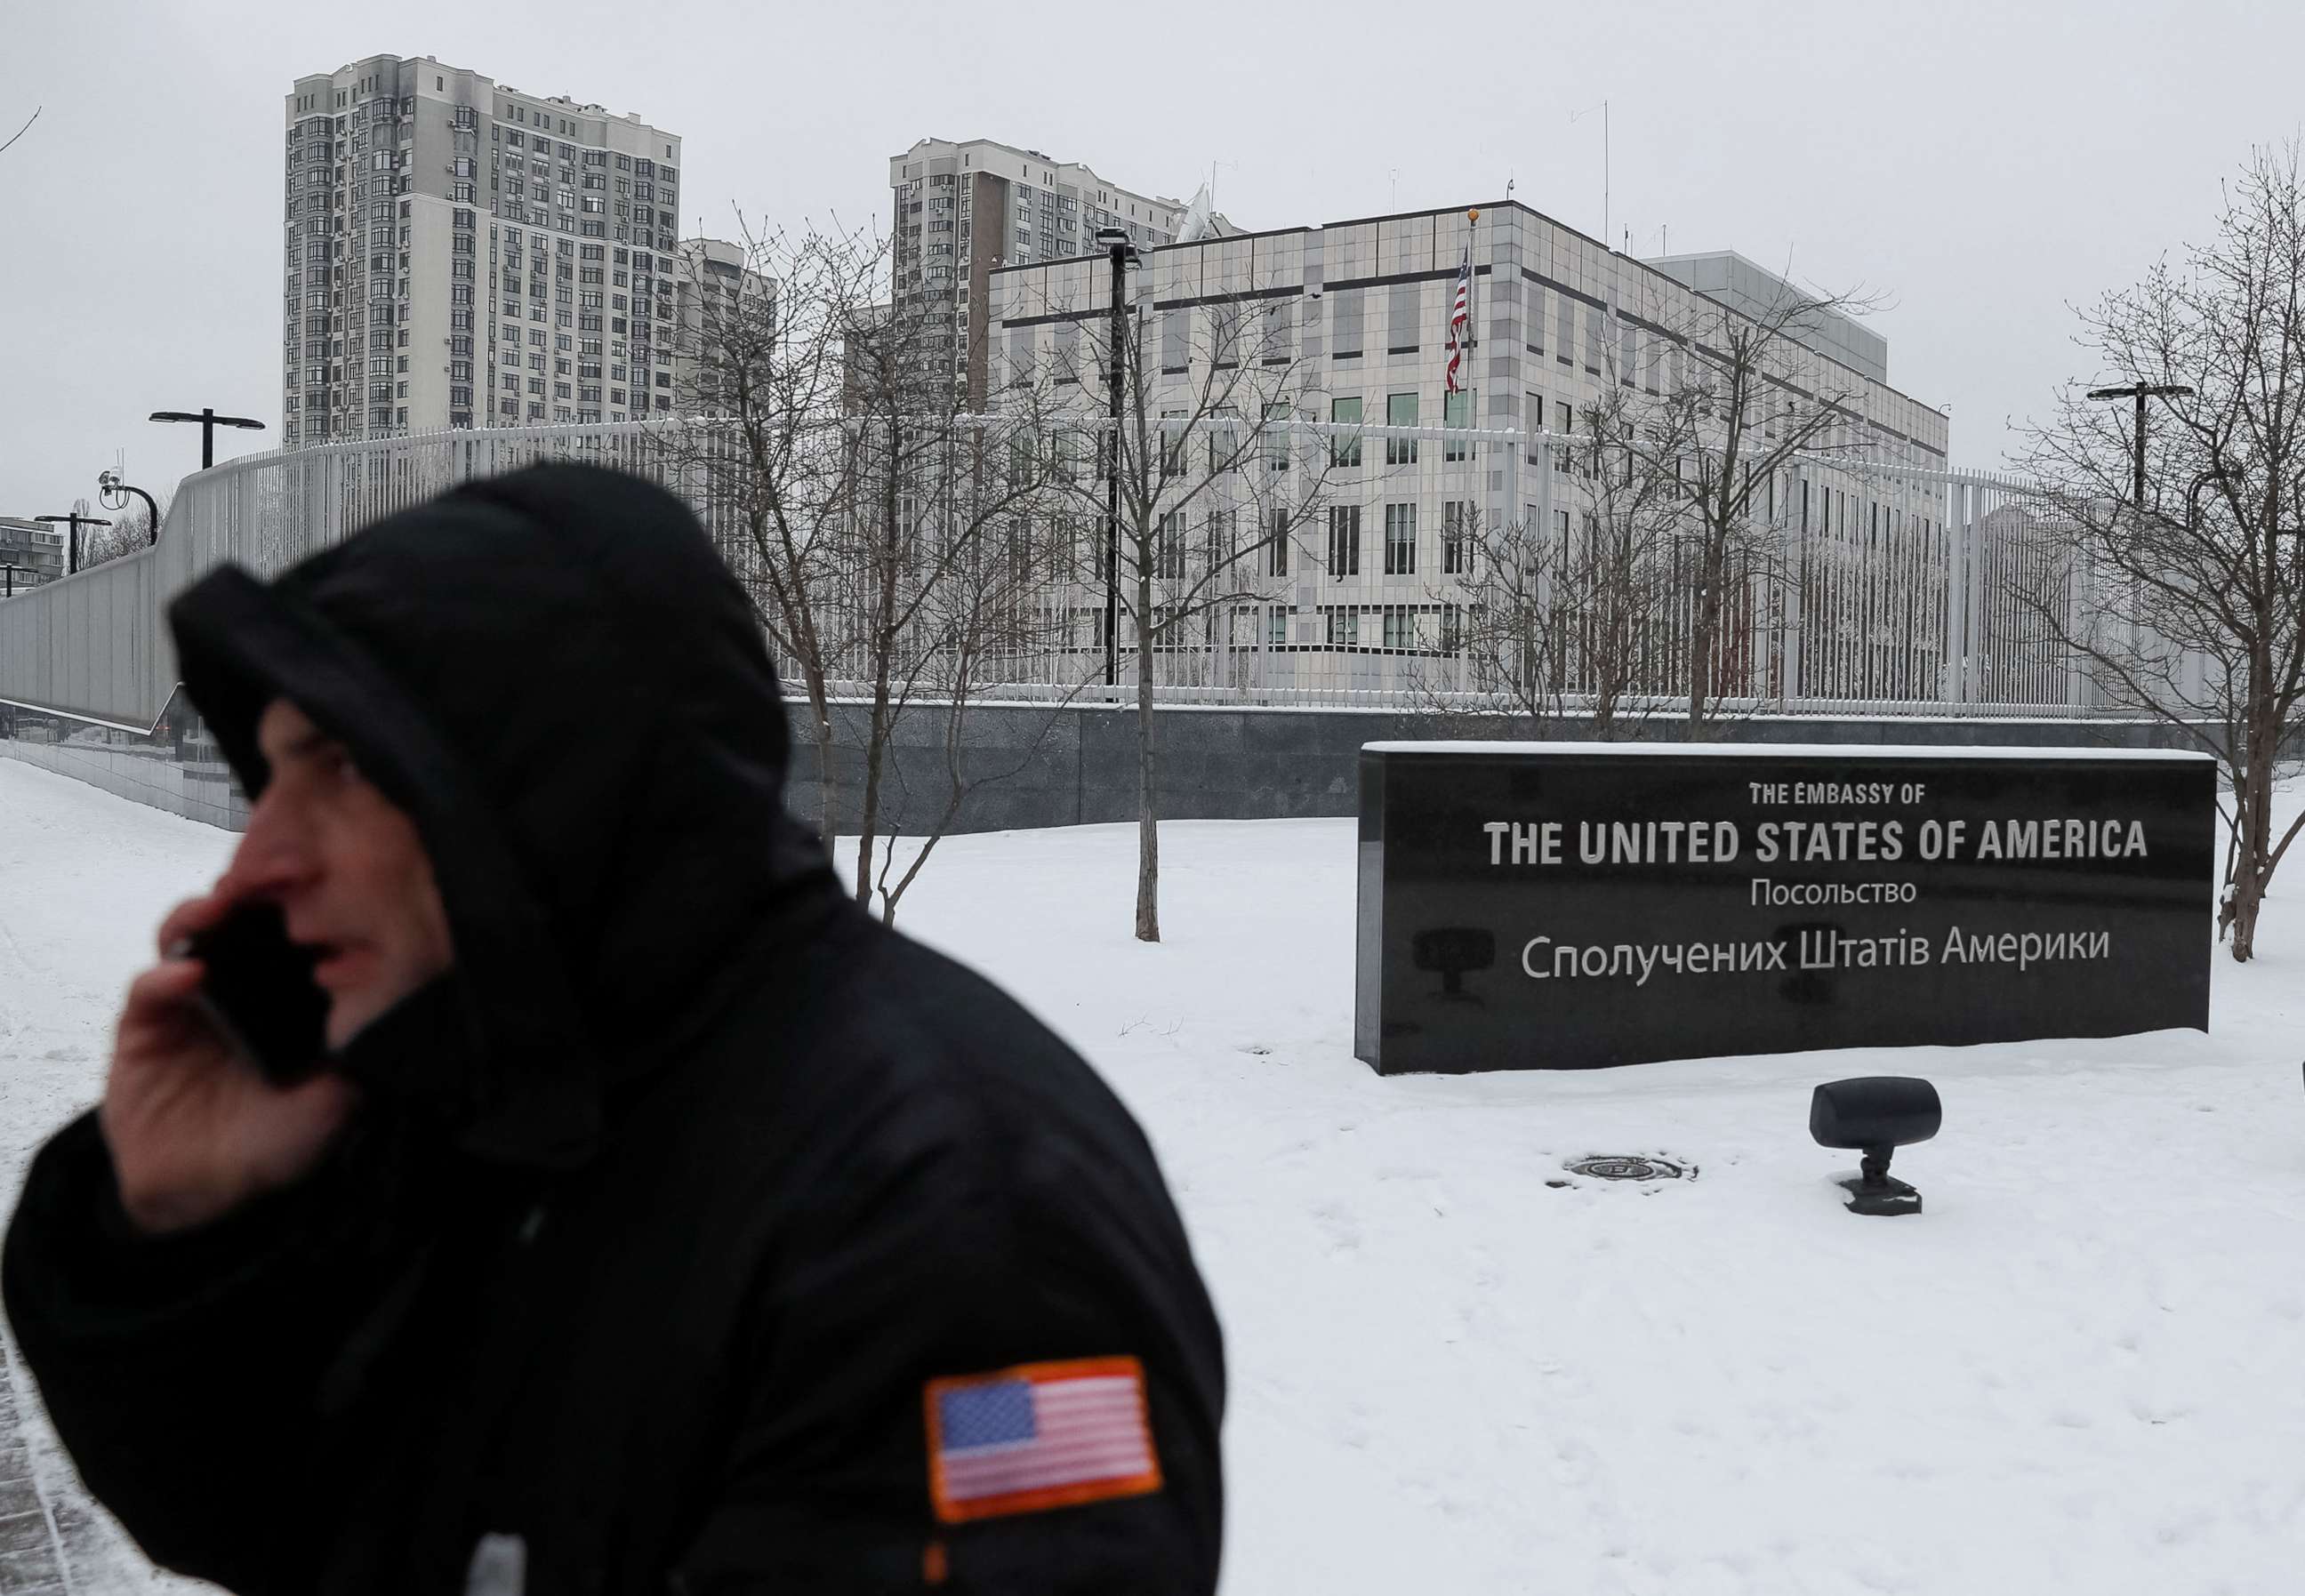 PHOTO: A security guard speaks on a mobile phone outside the U.S. embassy in Kyiv, Ukraine, Jan. 24, 2022.